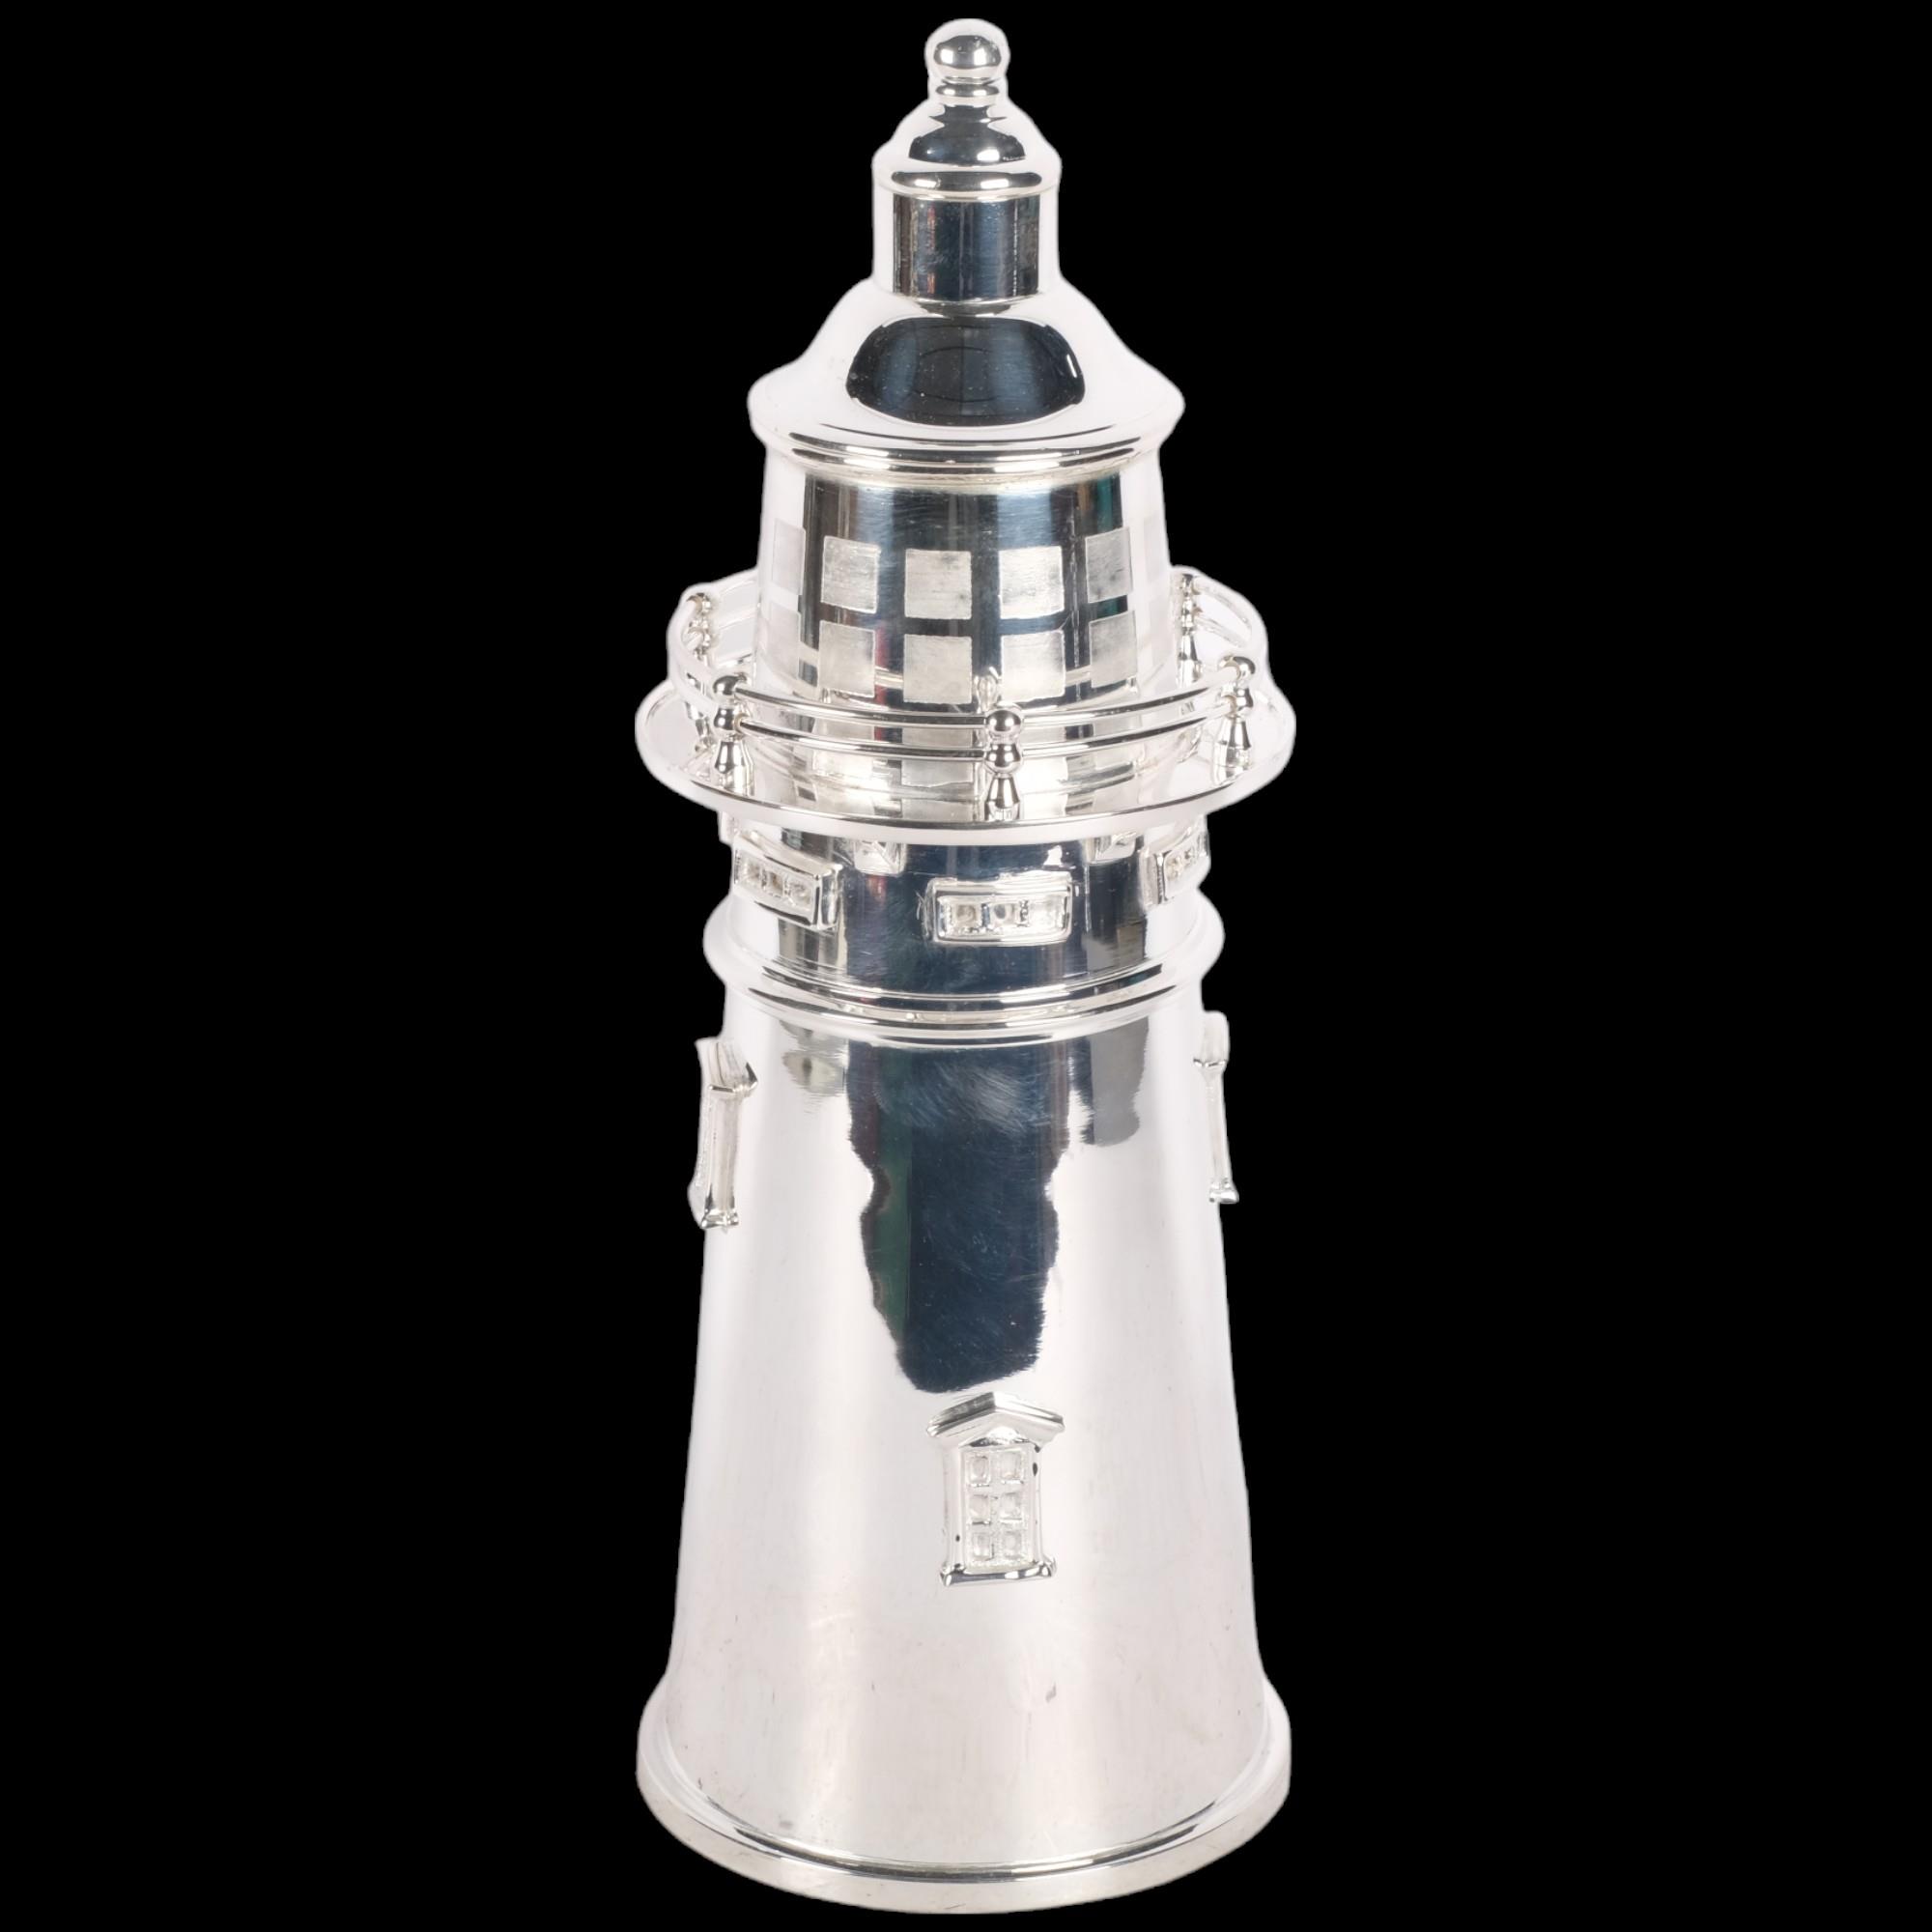 A silver plated modern lighthouse design cocktail shaker, H34cm